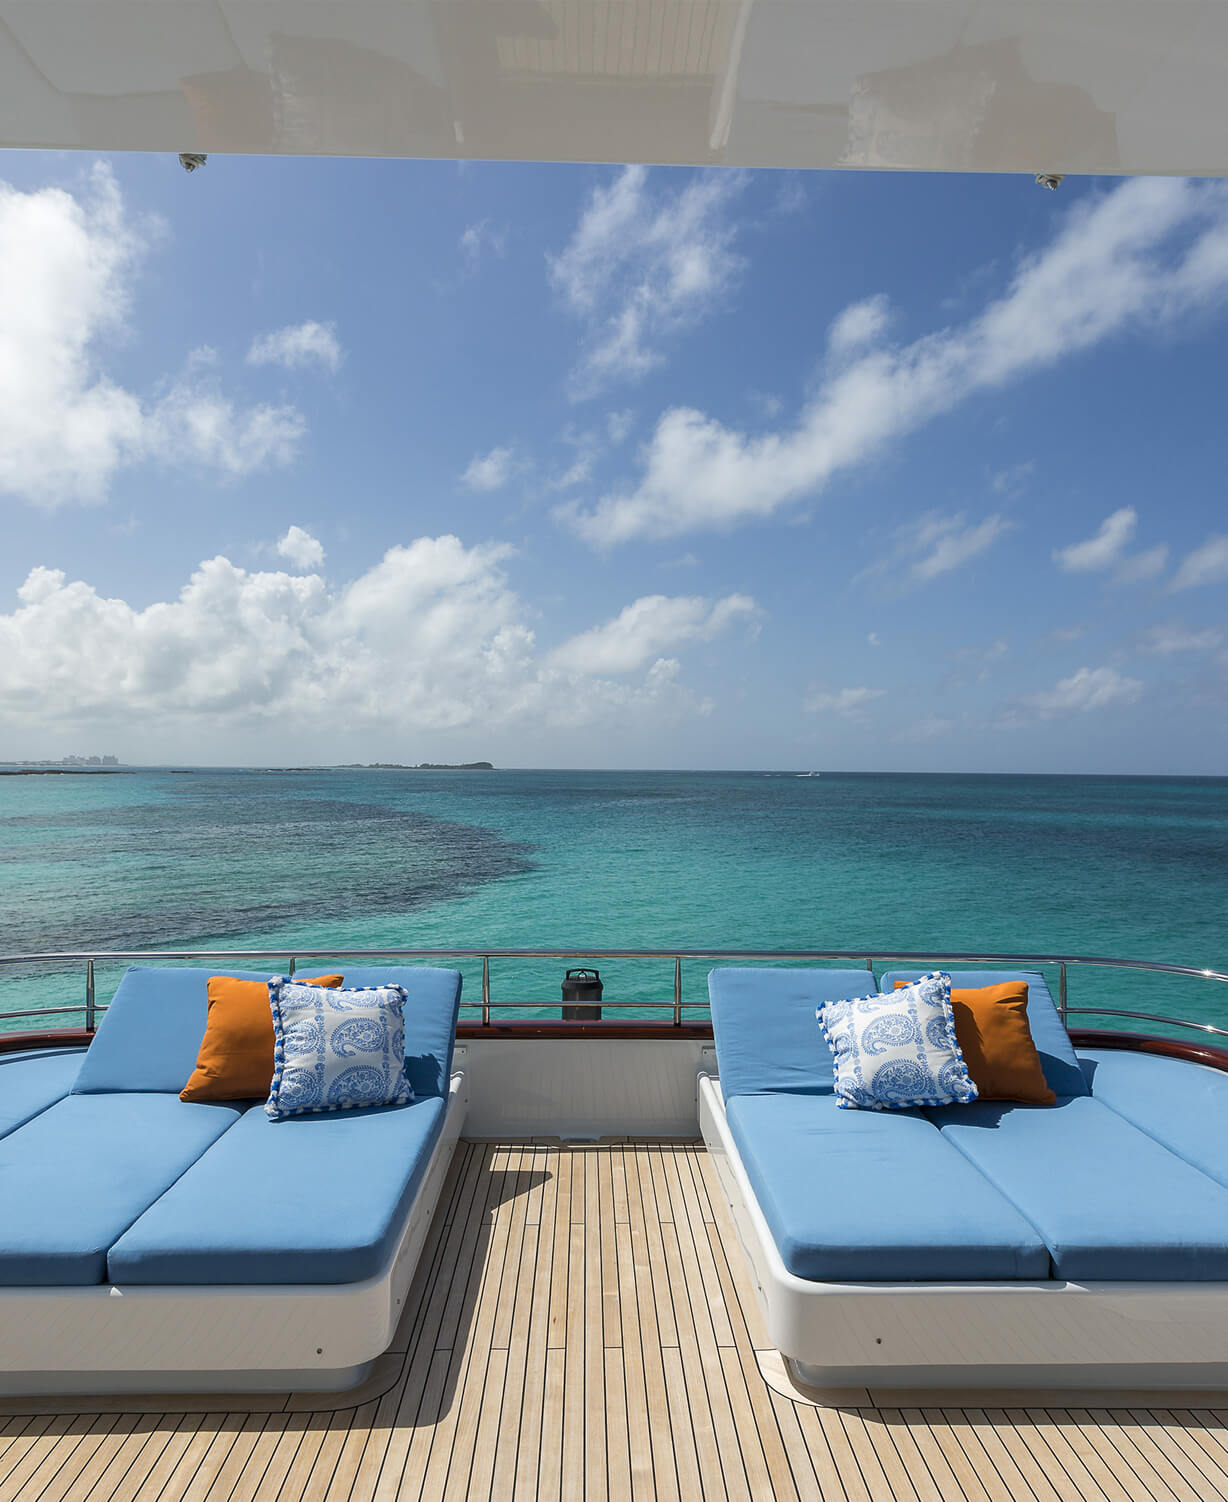 Luxury boat deck with blue cushioned lounge-seating on the water with blue sky and clouds in background.